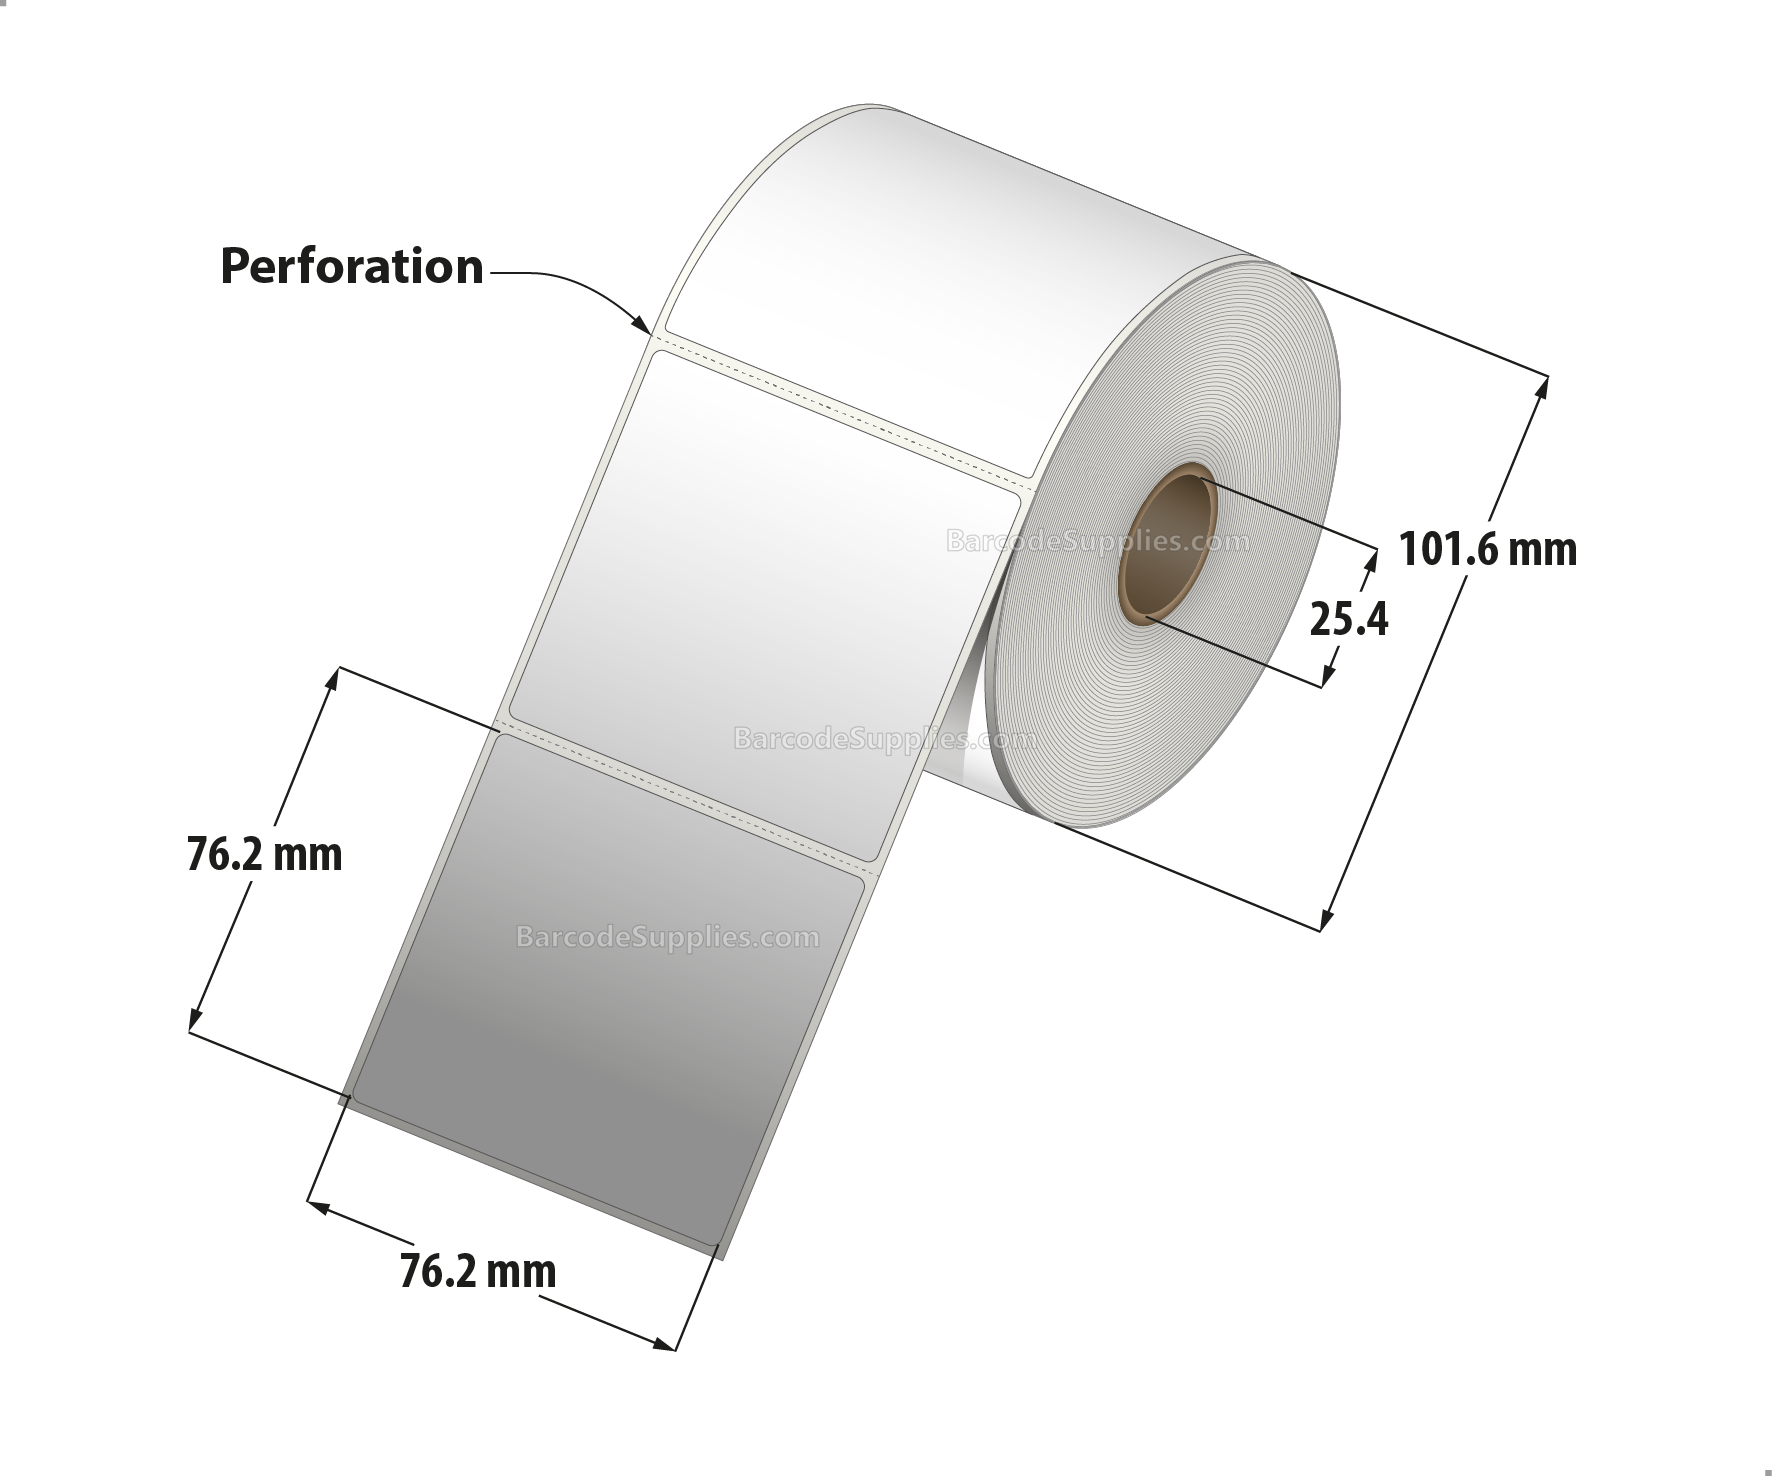 3 x 3 Direct Thermal White Labels With Permanent Acrylic Adhesive - Perforated - 500 Labels Per Roll - Carton Of 4 Rolls - 2000 Labels Total - MPN: DT33-14PDT